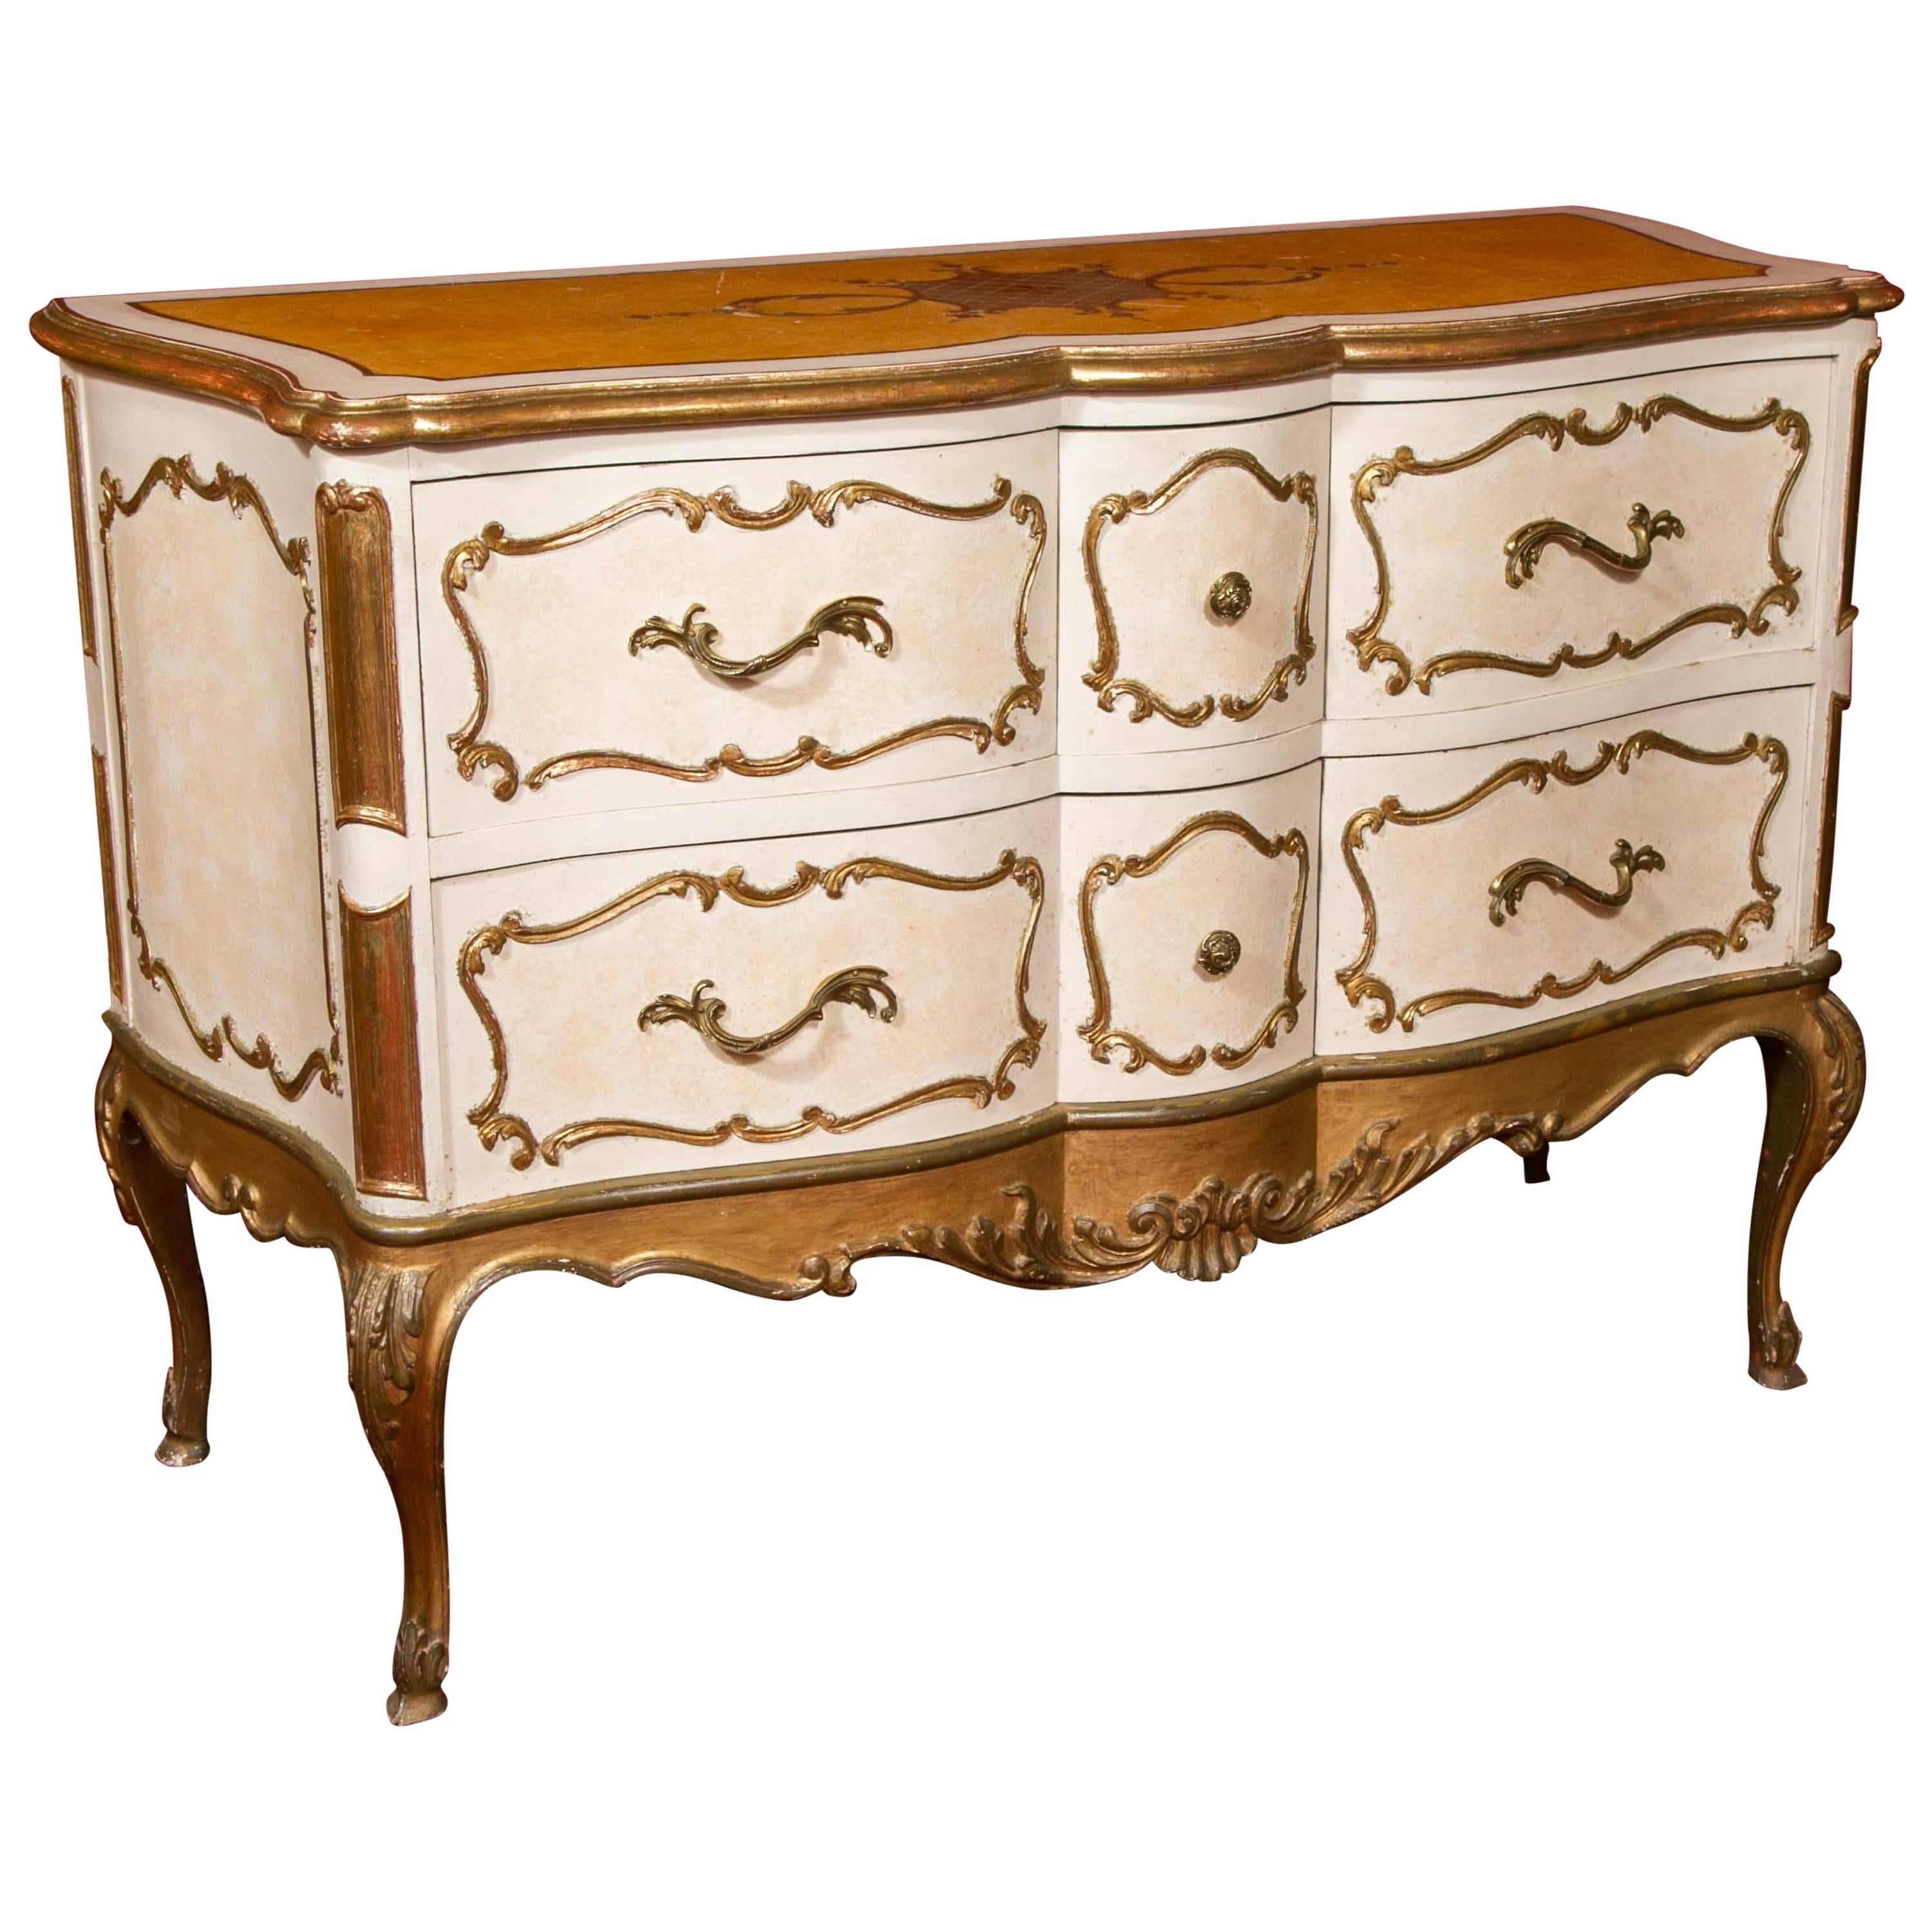 Italian Commode from the 1950s, Painted and Gilded, Very Well-Made